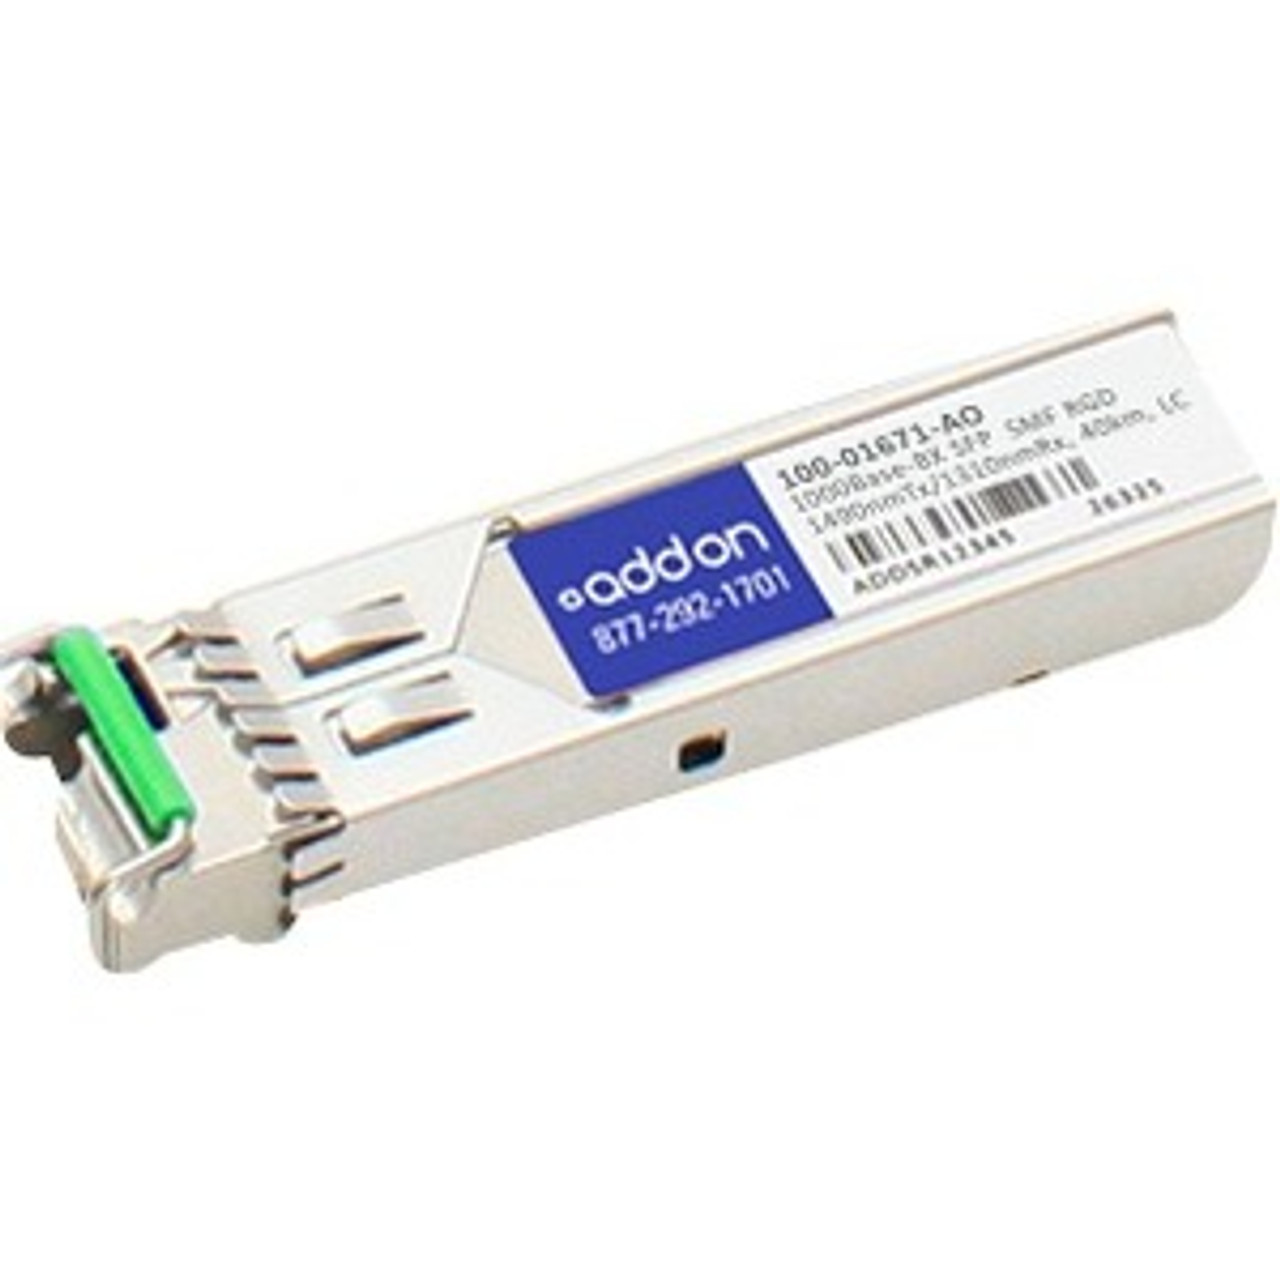 100-01671-AO AddOn 1.25Gbps 1000Base-BX-D Single-mode Fiber 40km 1490nmTX/1310nmRX LC Connector SFP Transceiver Module for Calix Compatible